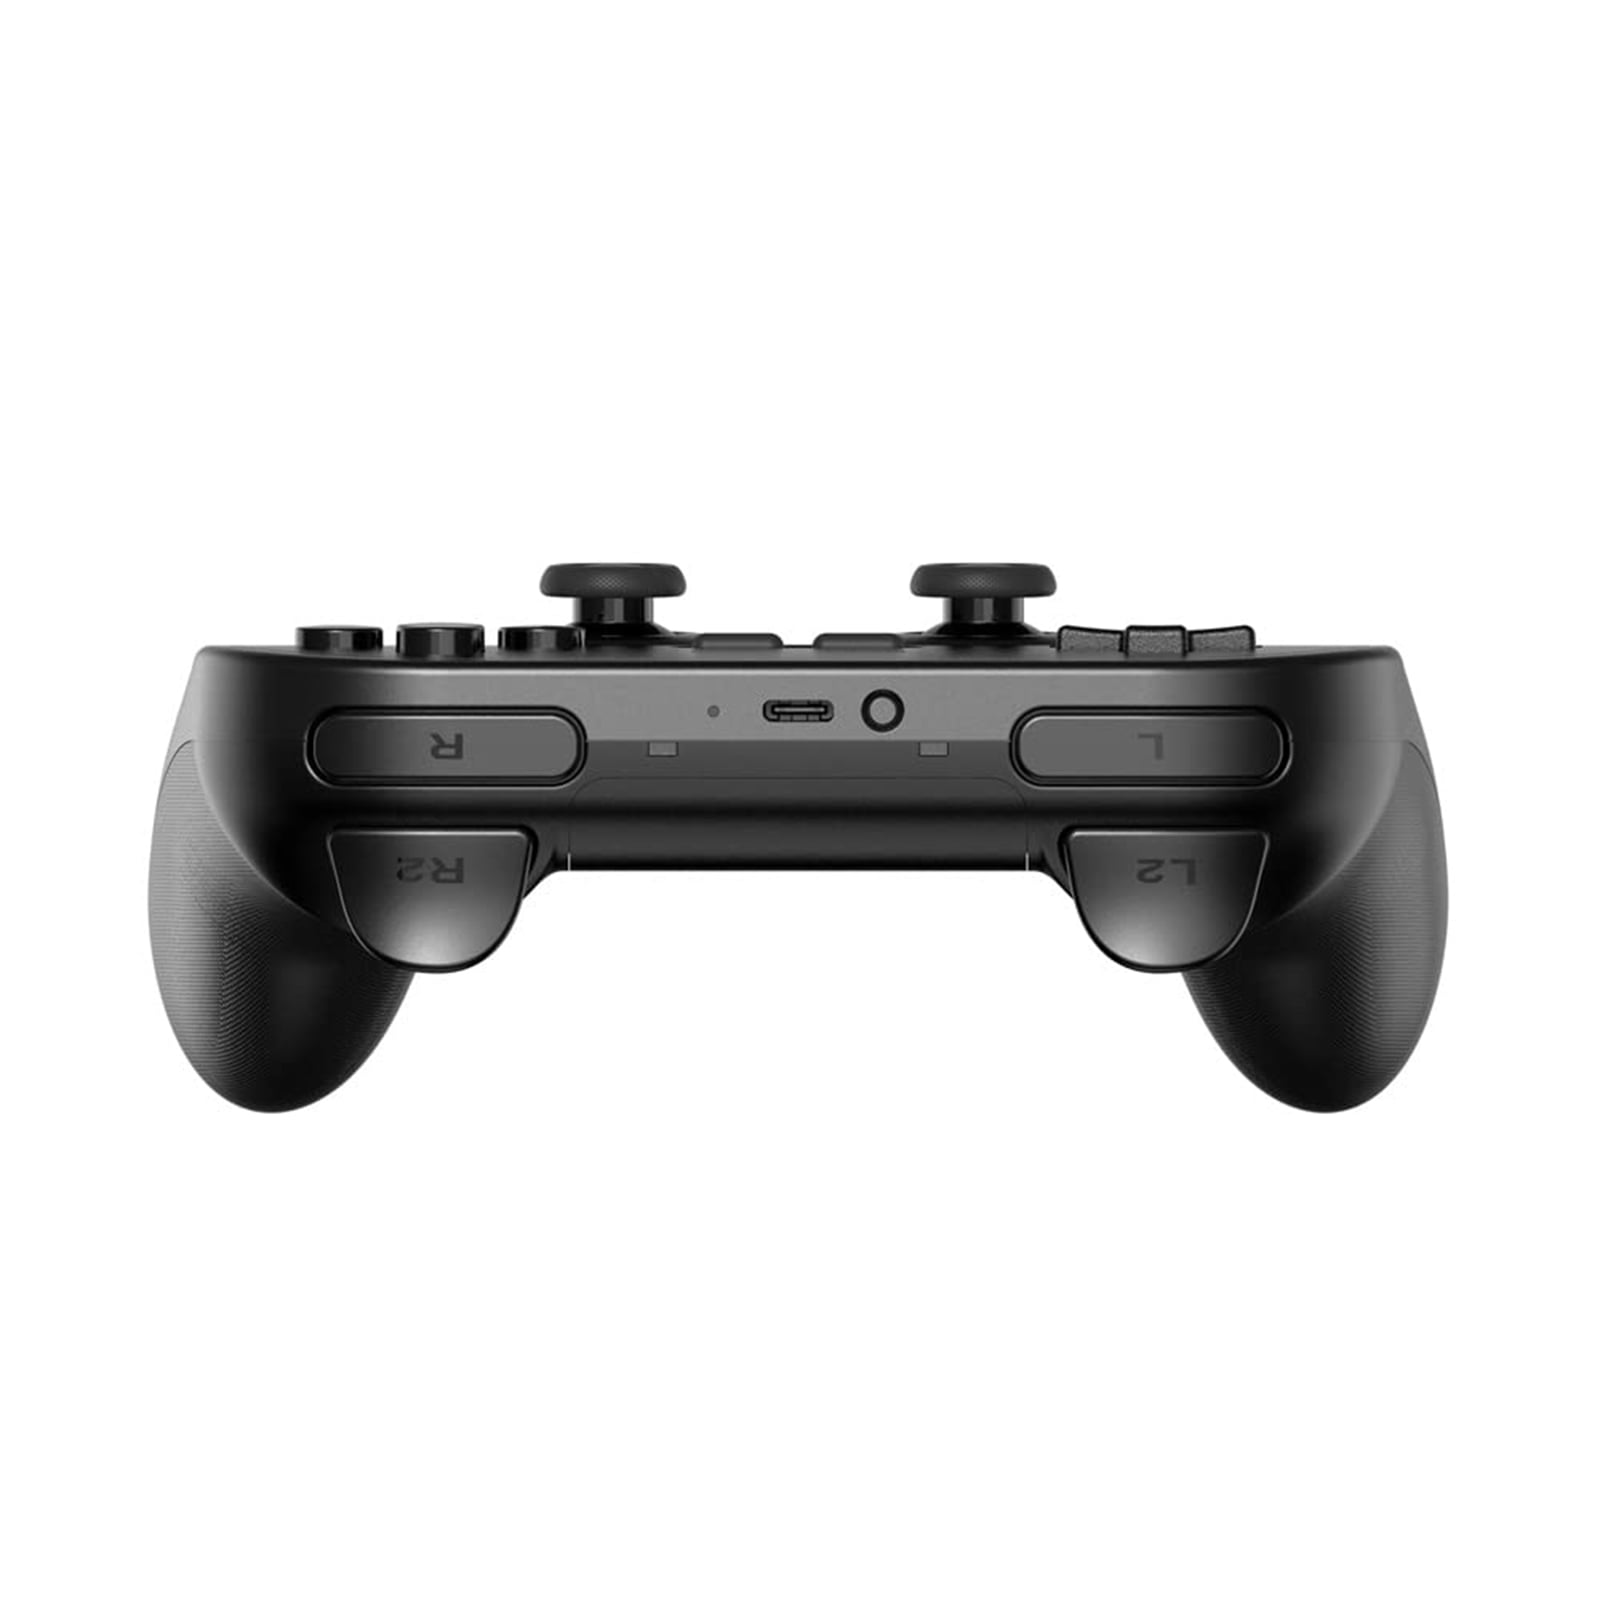  8BitDo Pro 2 Bluetooth Controller for Switch, PC, Android,  Steam Deck, Gaming Controller for iPhone, iPad, macOS and Apple TV (Black  Edition) : Video Games